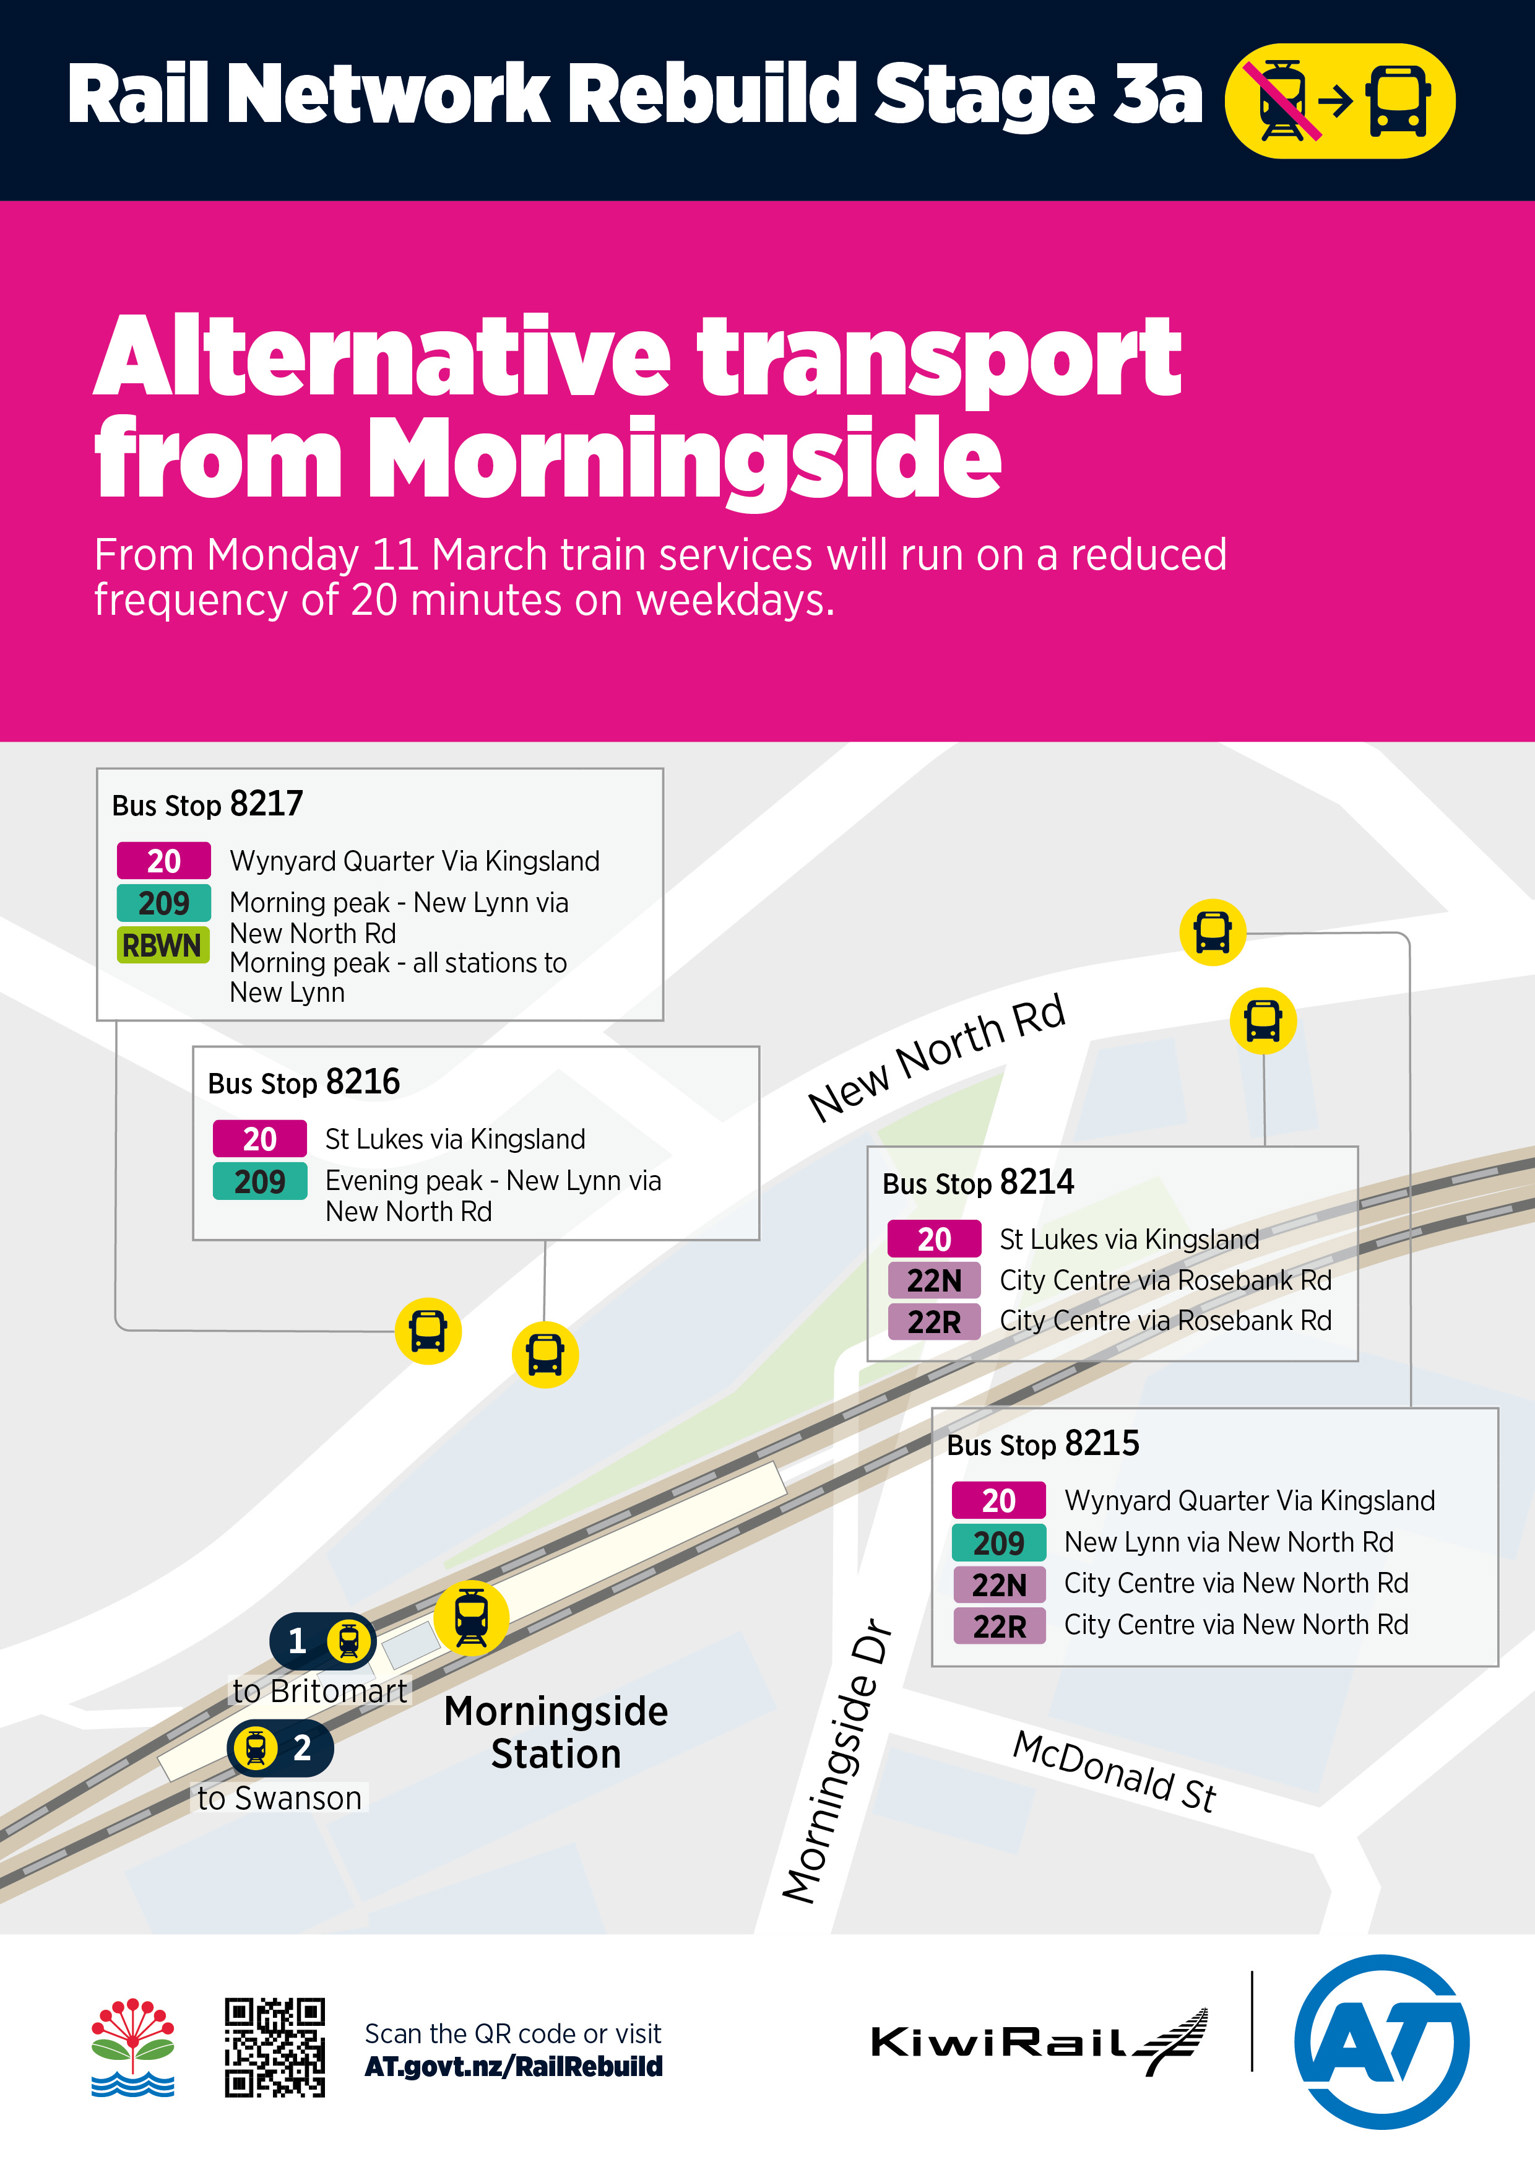 Poster showing alternative transport options from Morningside Station during Stage 3 of the Rail Network Rebuild